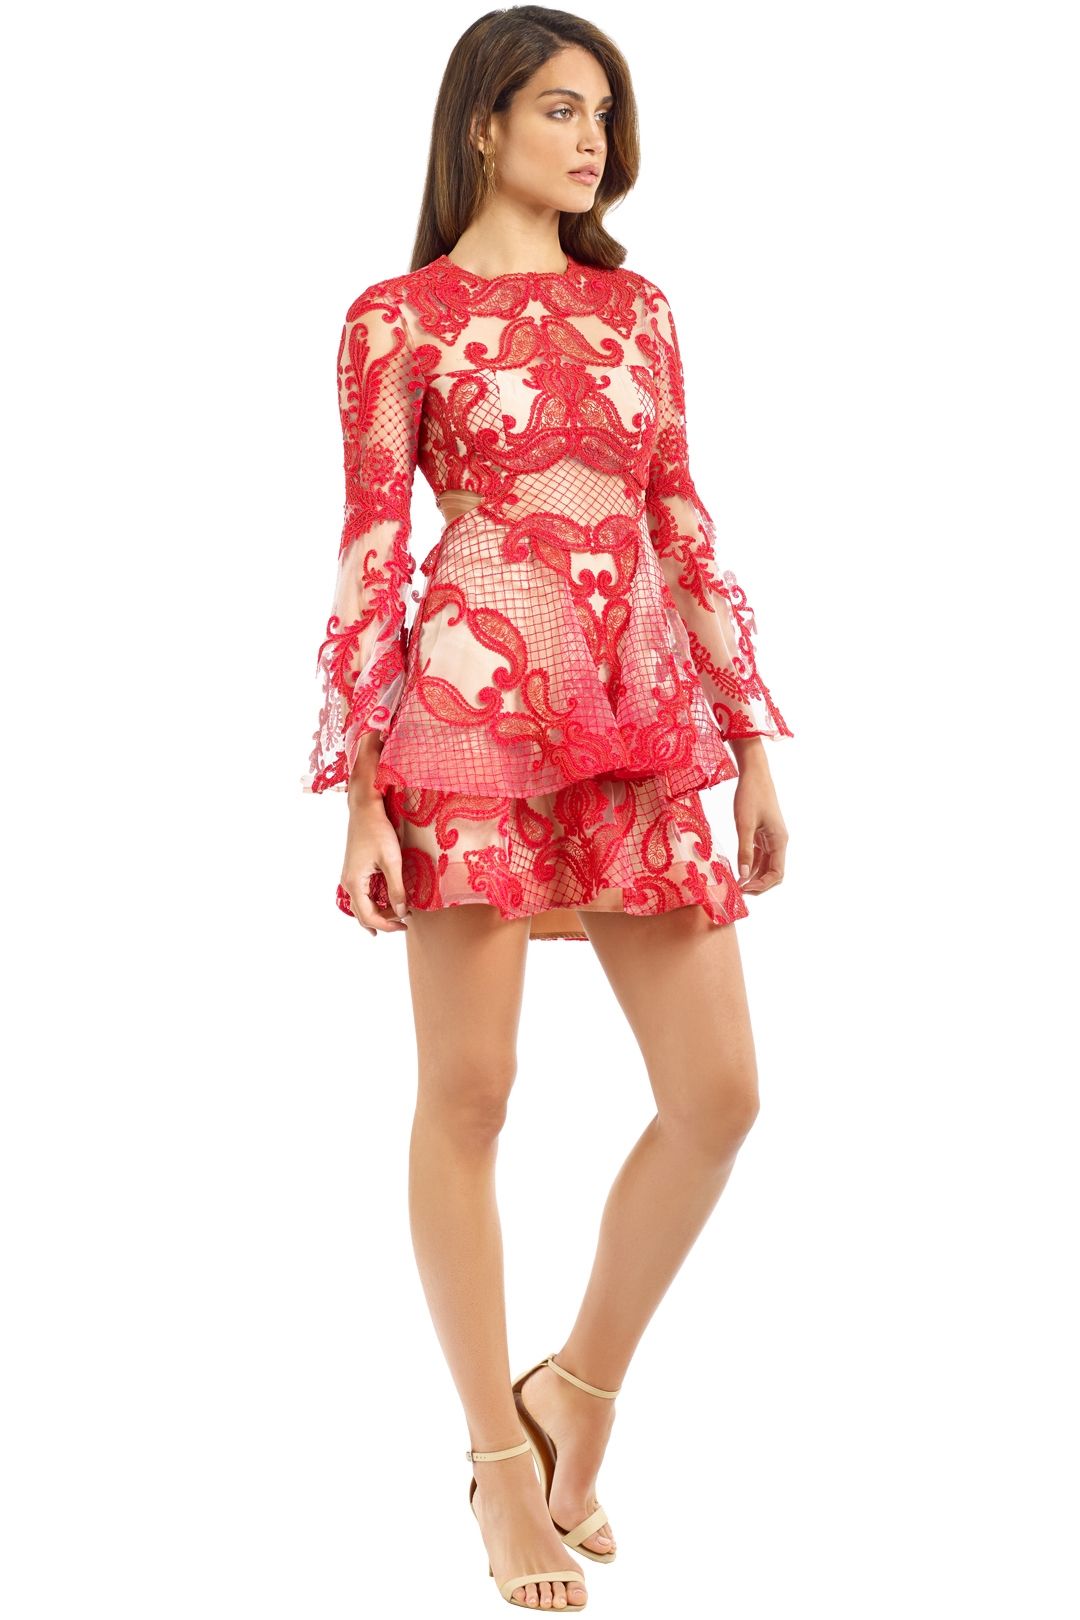 Thurley - Paisley Passion Dress - Red - Side